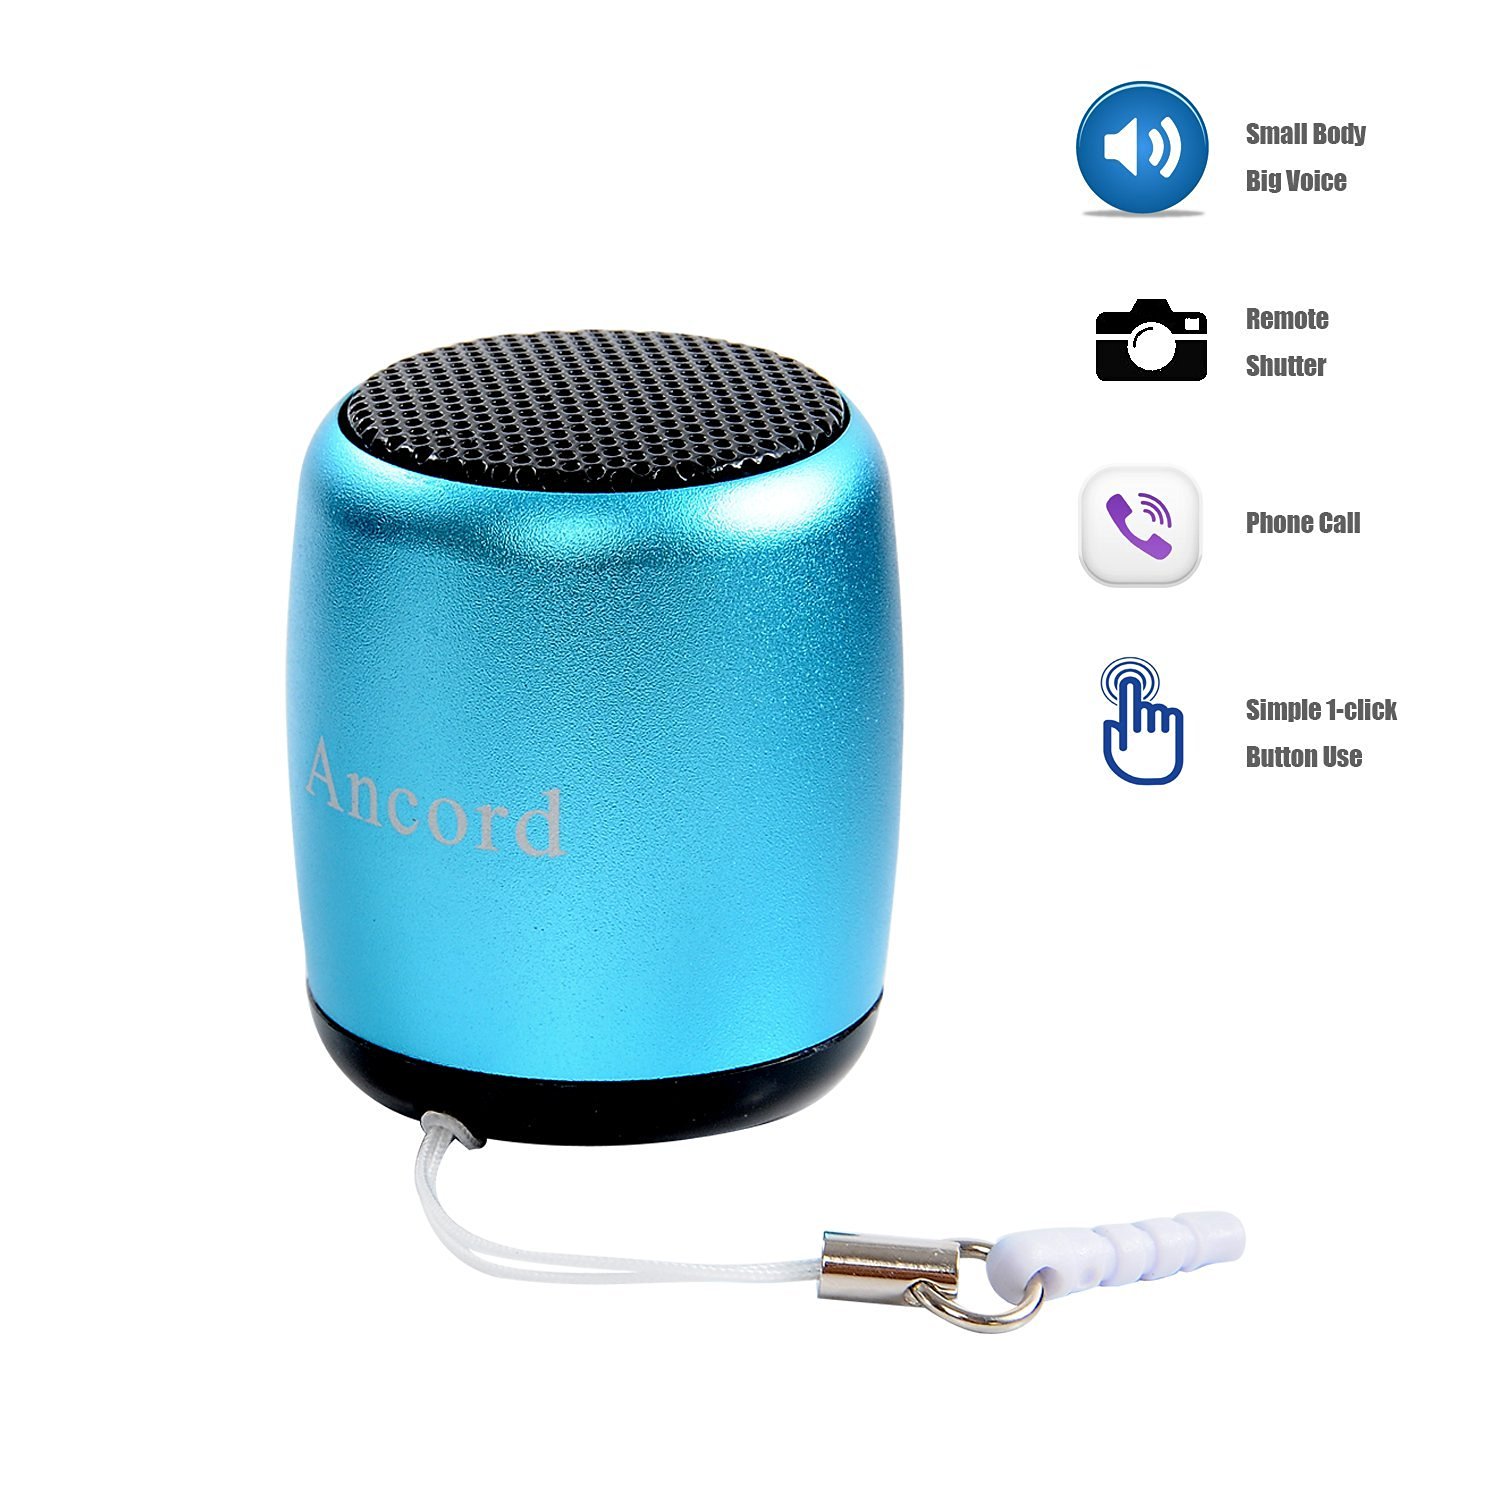 2-mini-bluetooth-speaker-portable-by-ancord-small-body-loud-voice-shutter-button-selfie-features-blue